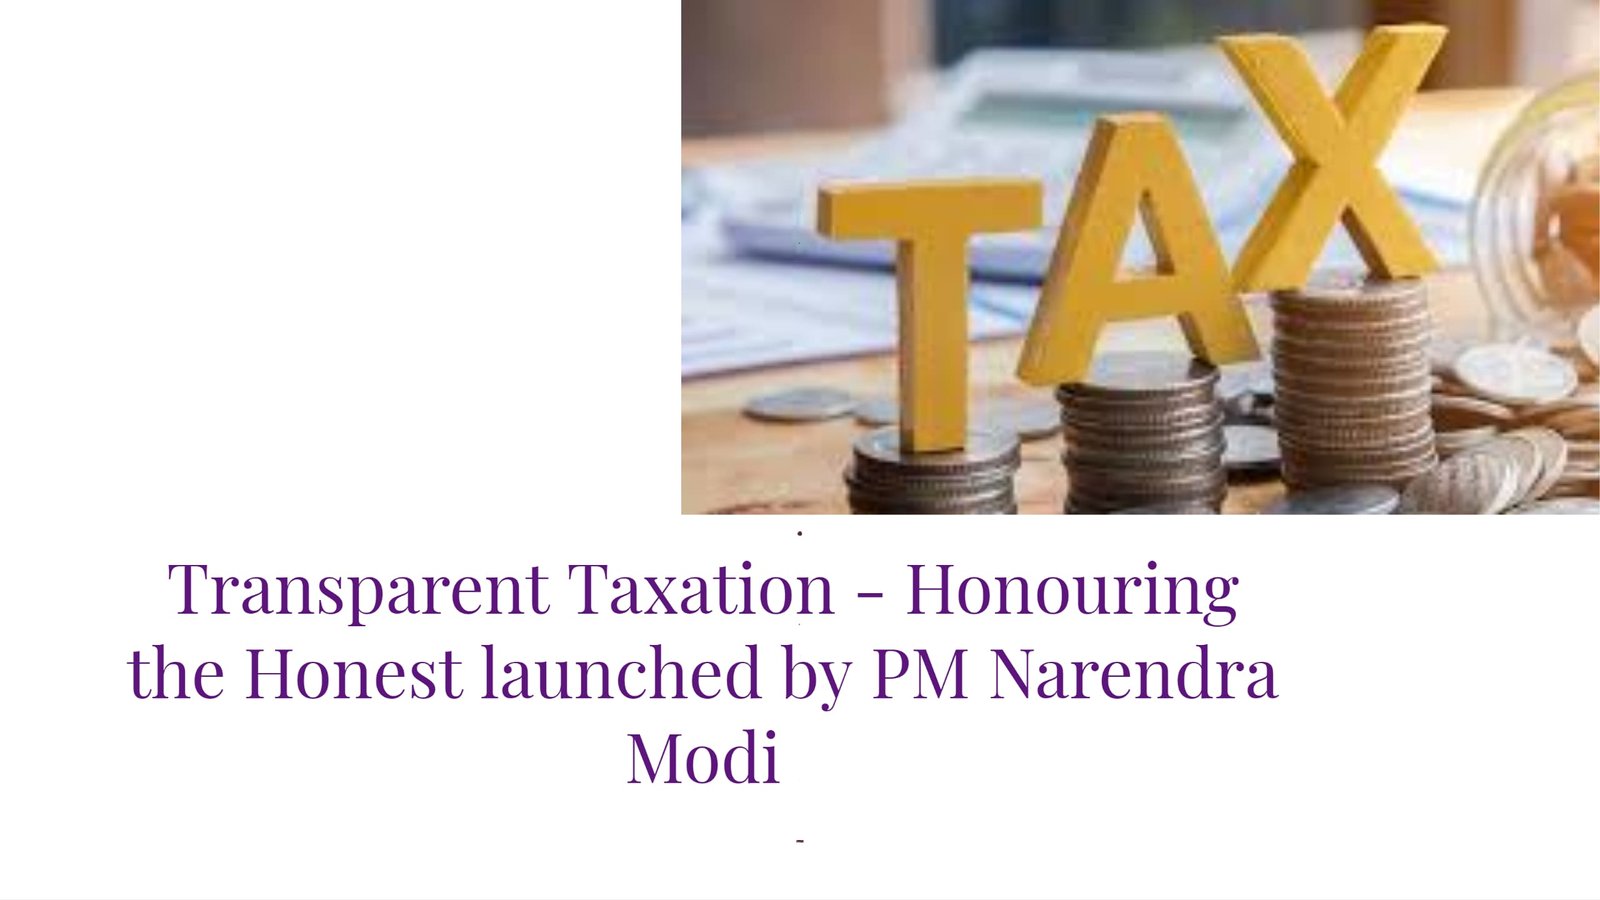 Transparent Taxation - Honouring the Honest launched by PM Narendra Modi